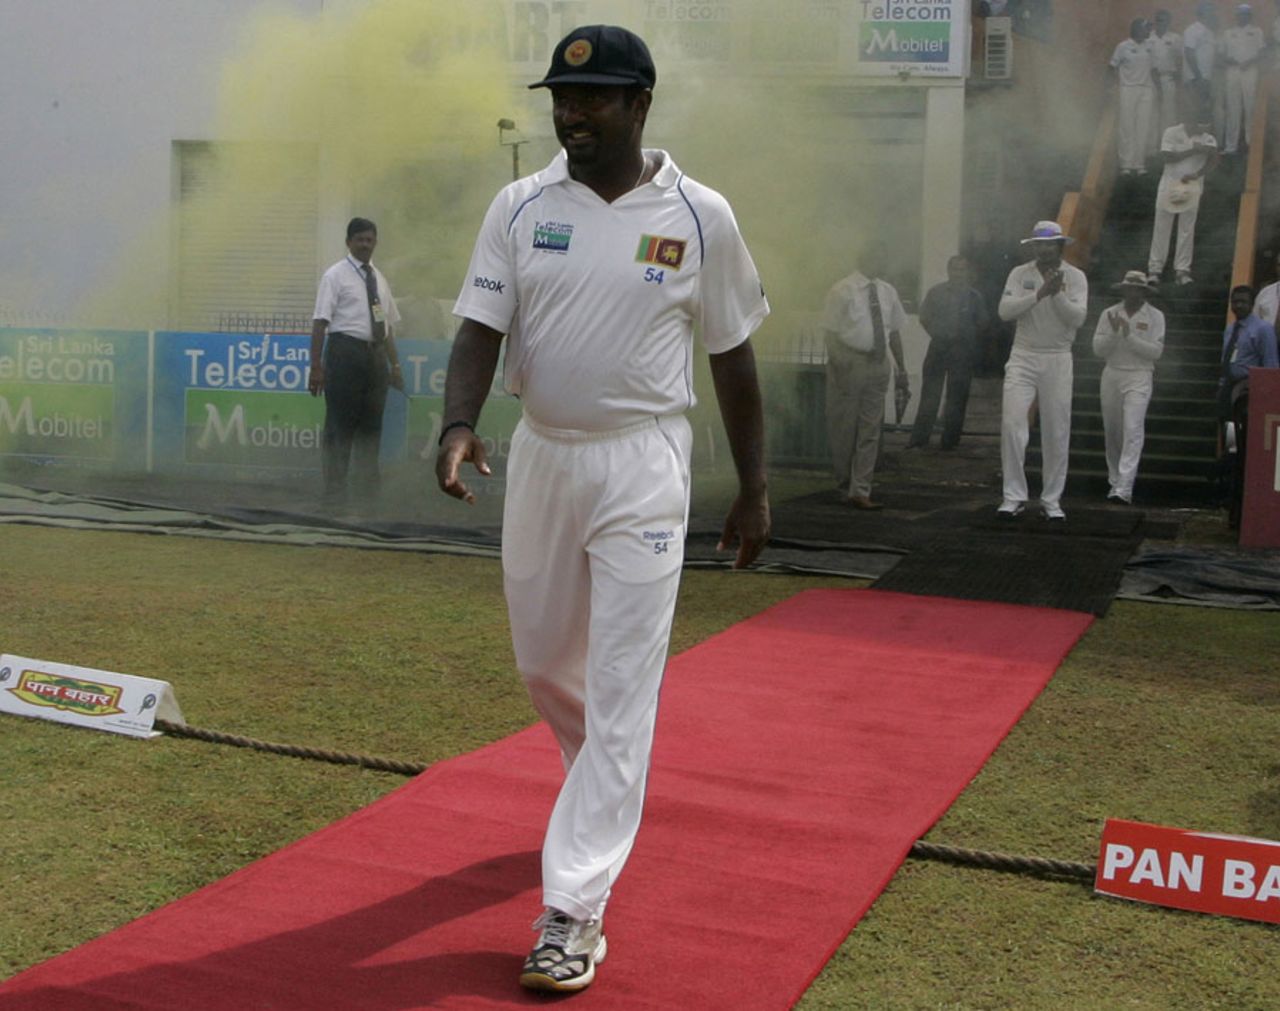 Muttiah Muralitharan walks down a red carpet into the field for his last day of Test cricket, Sri Lanka v India, 1st Test, Galle, 5th day, July 22, 2010